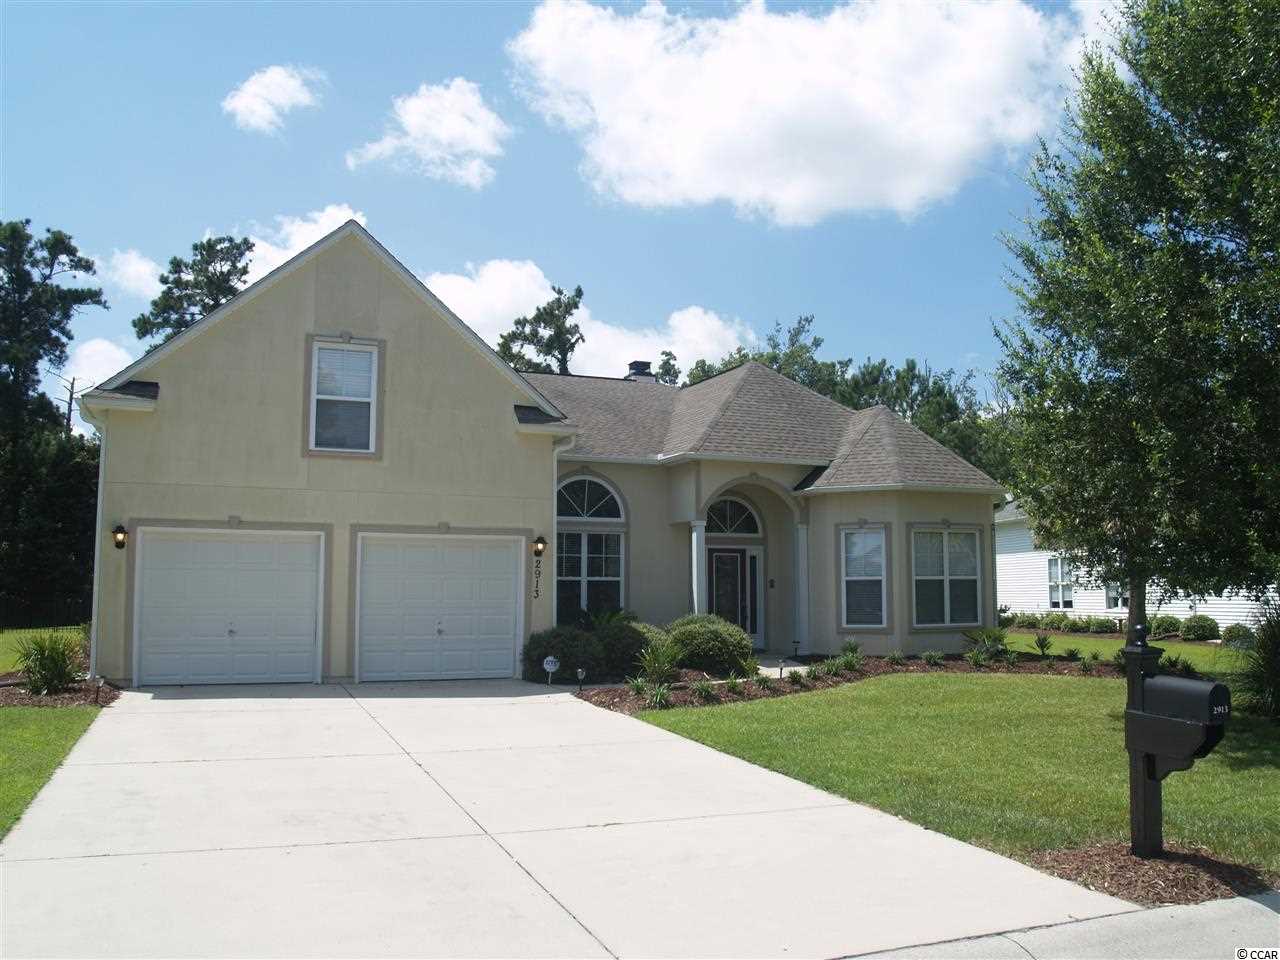 2913 Winding River Dr. North Myrtle Beach, SC 29582